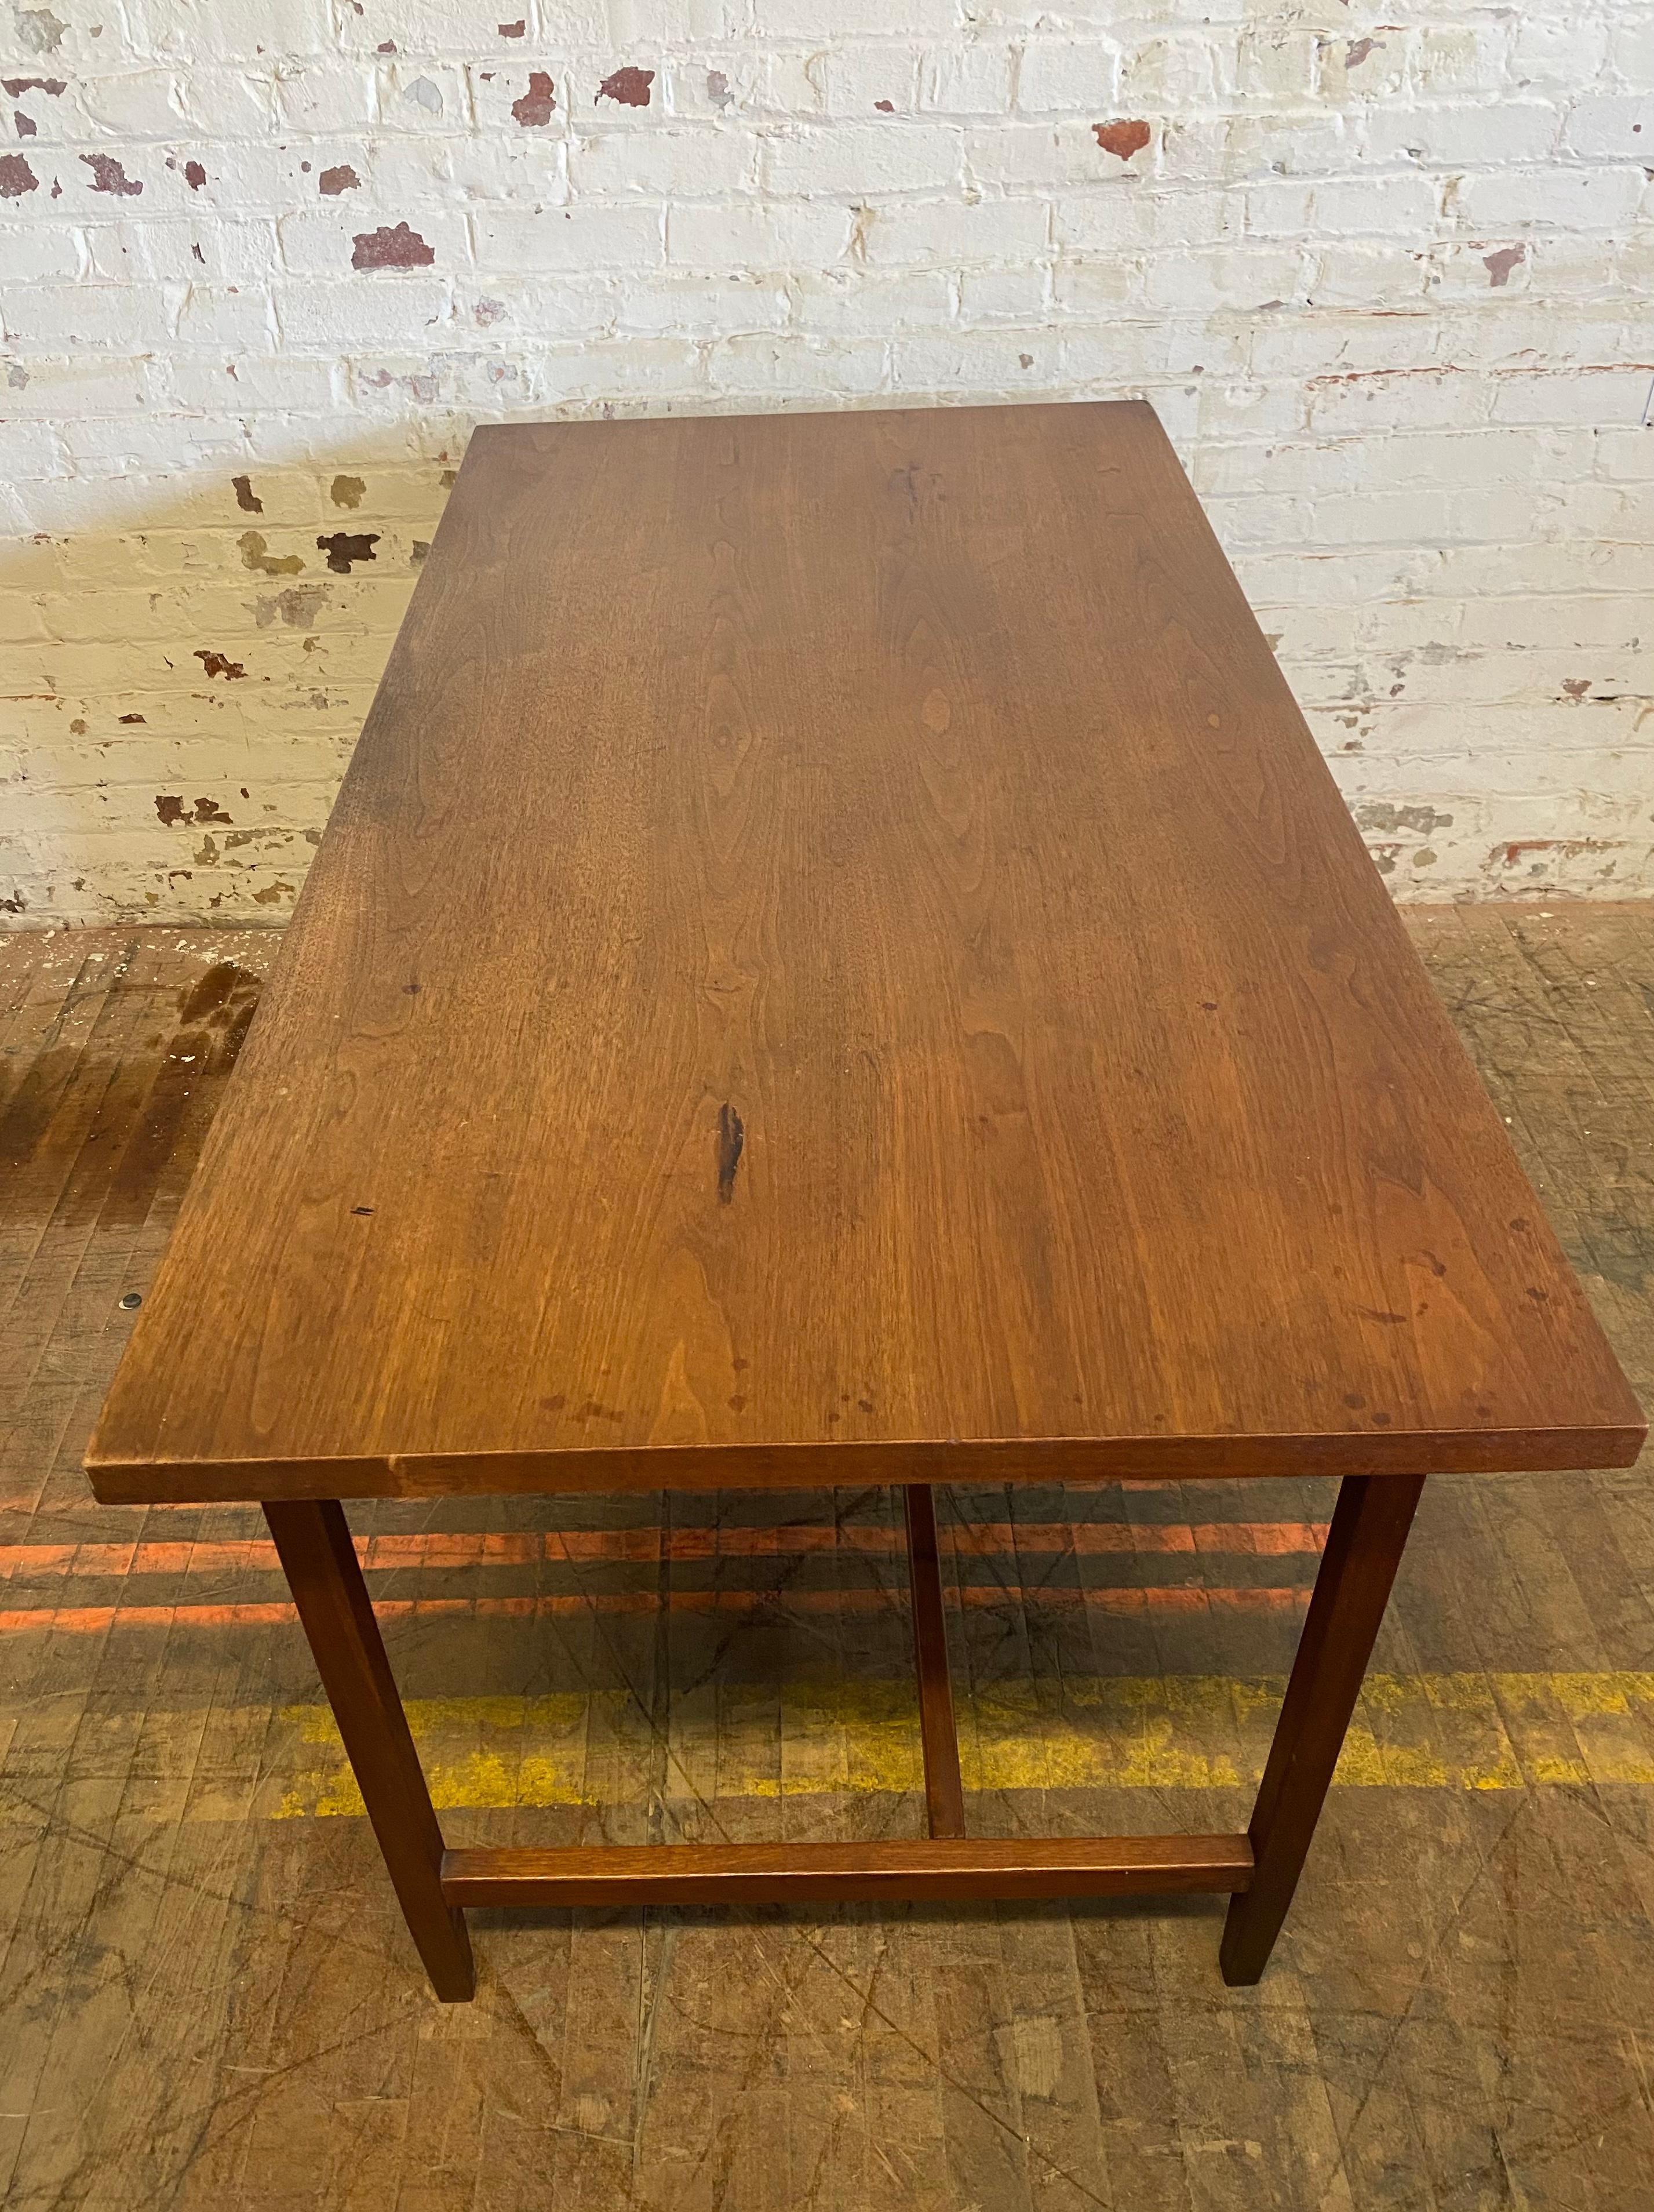 Early production Florence Knoll Desk, Classic Modernist design, Knoll New York For Sale 1